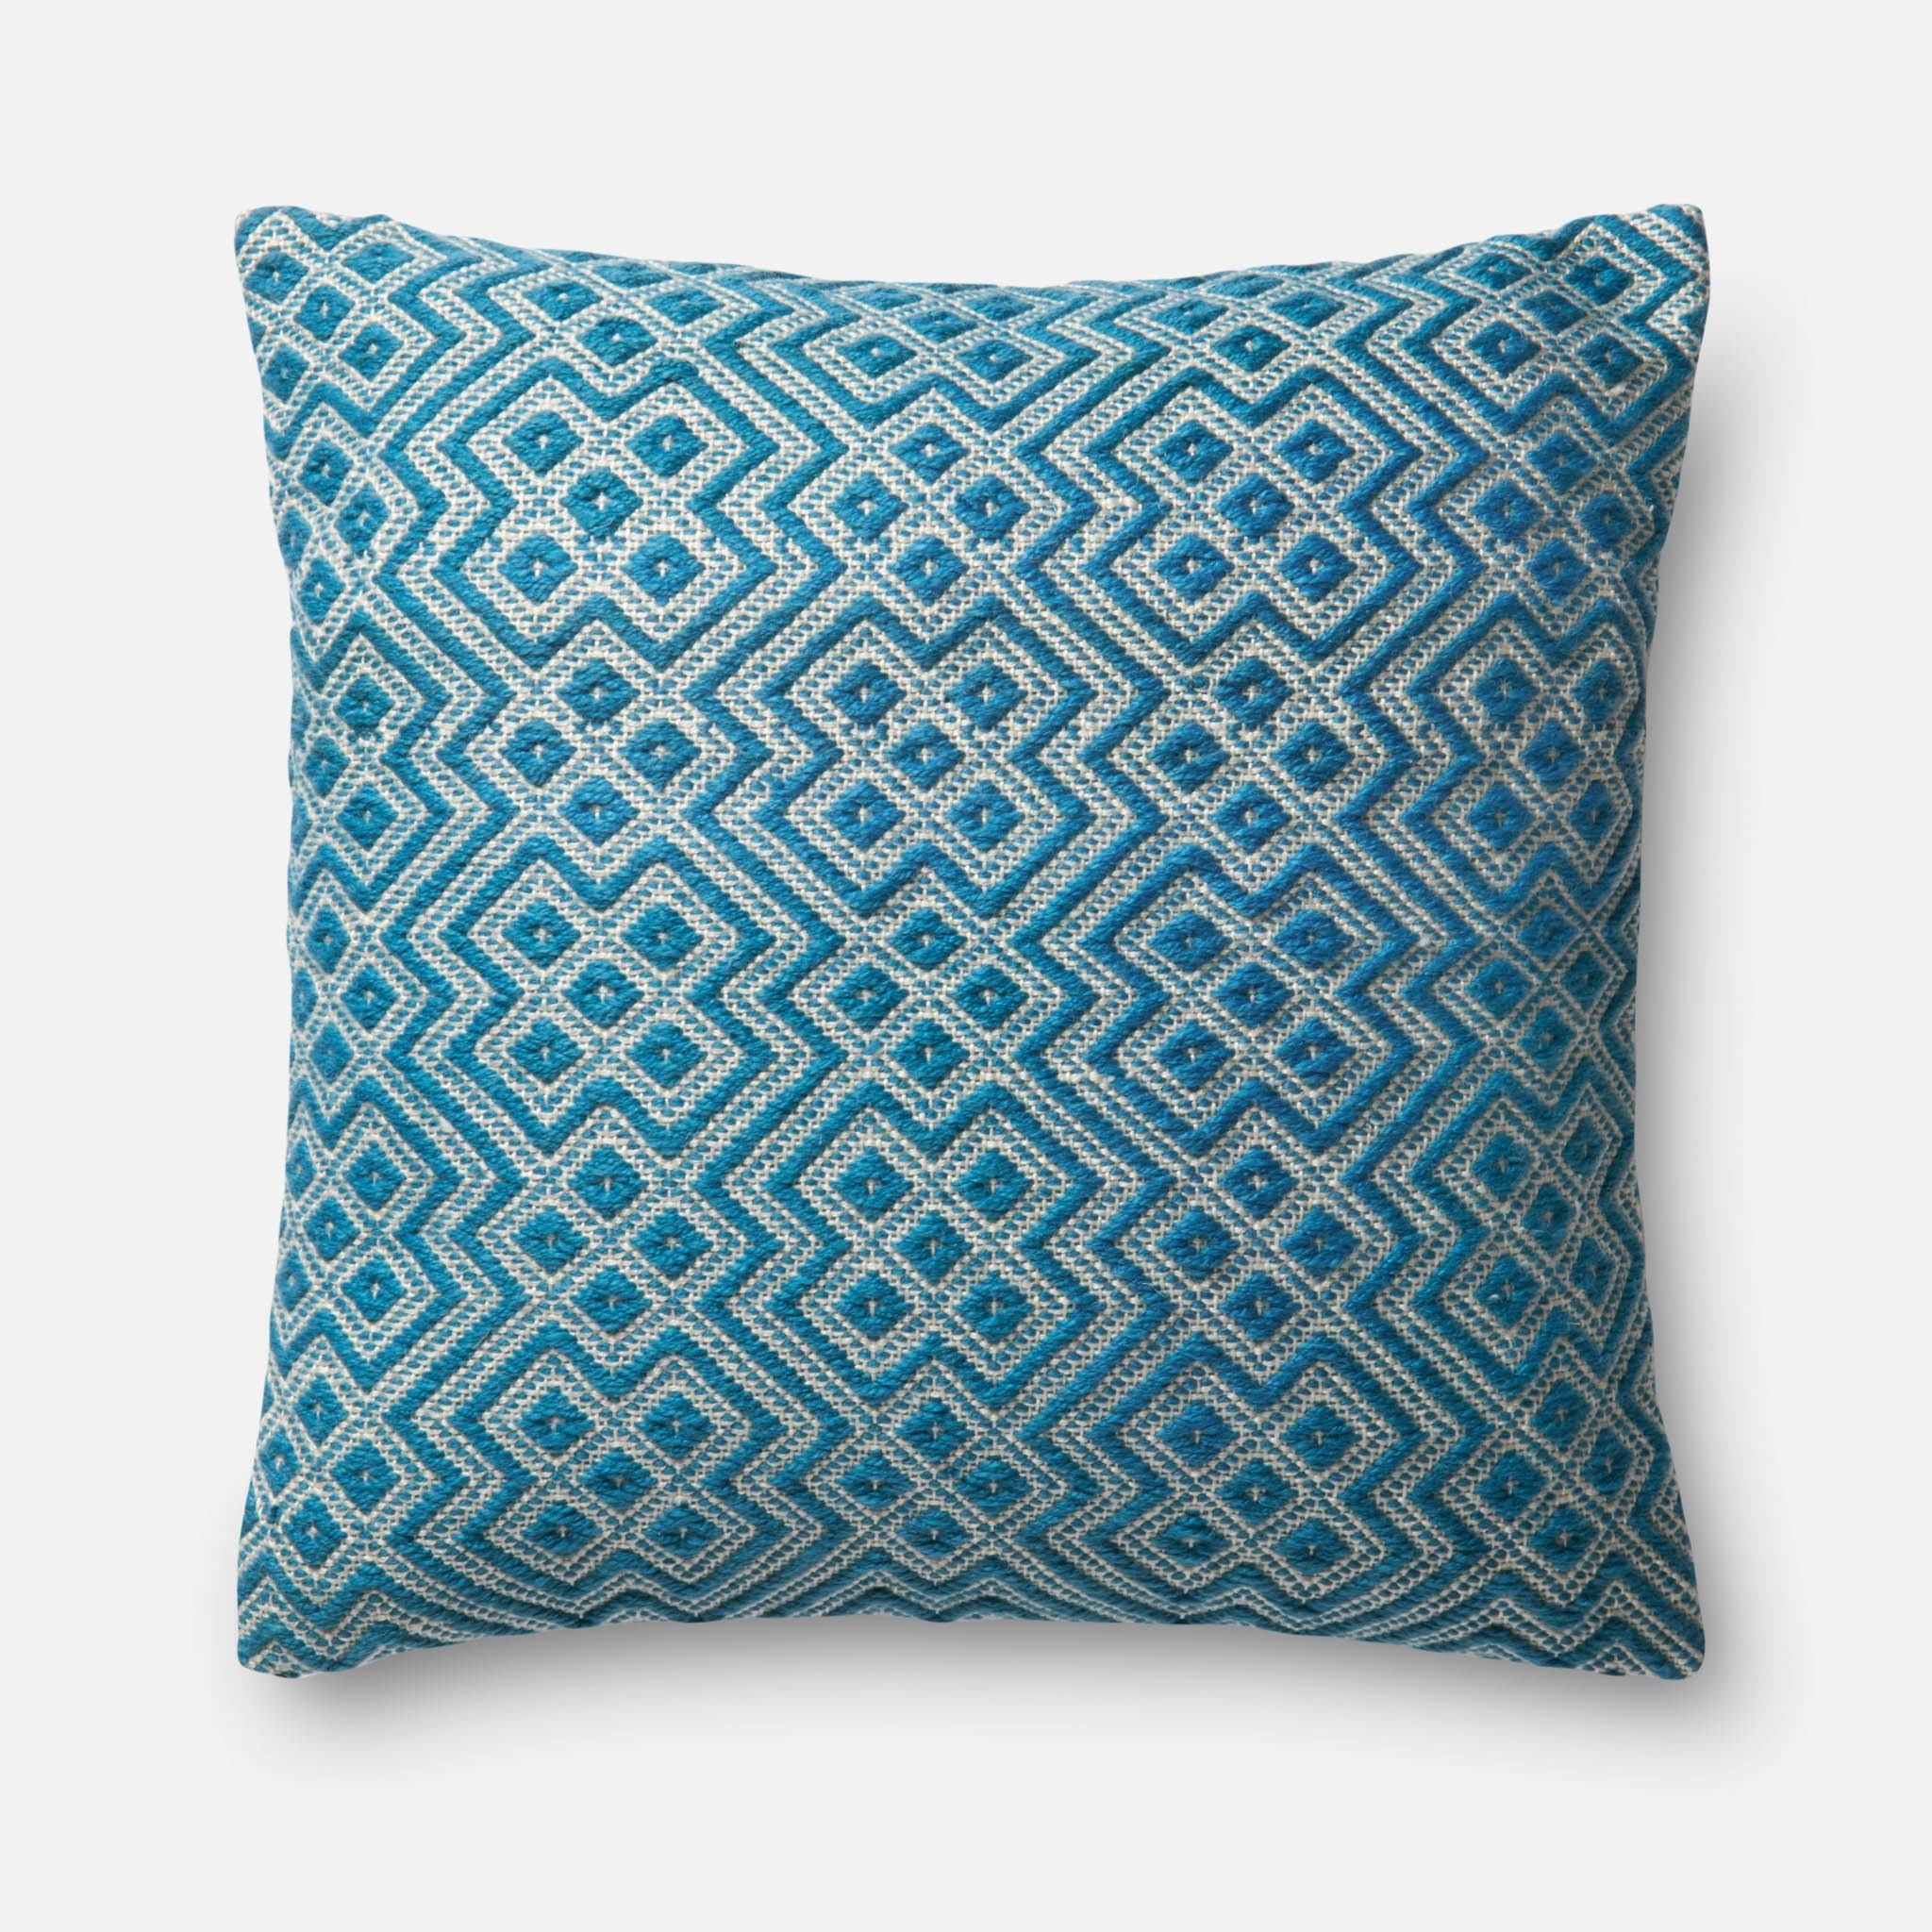 PILLOWS - TEAL / WHITE - 22" X 22" Cover Only - Image 0